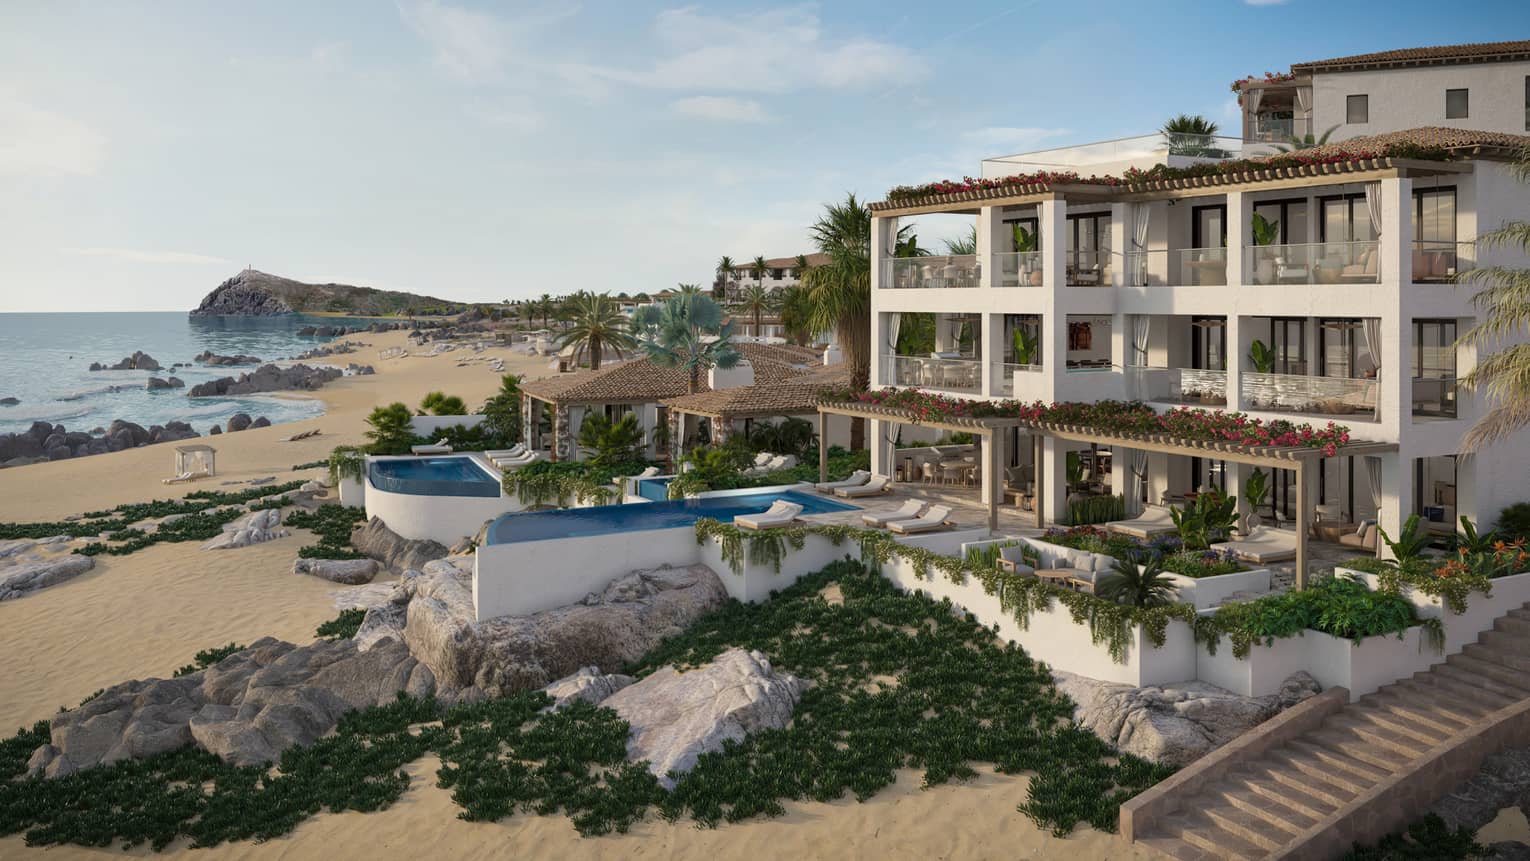 Exterior of private villas in Cabo on the beach